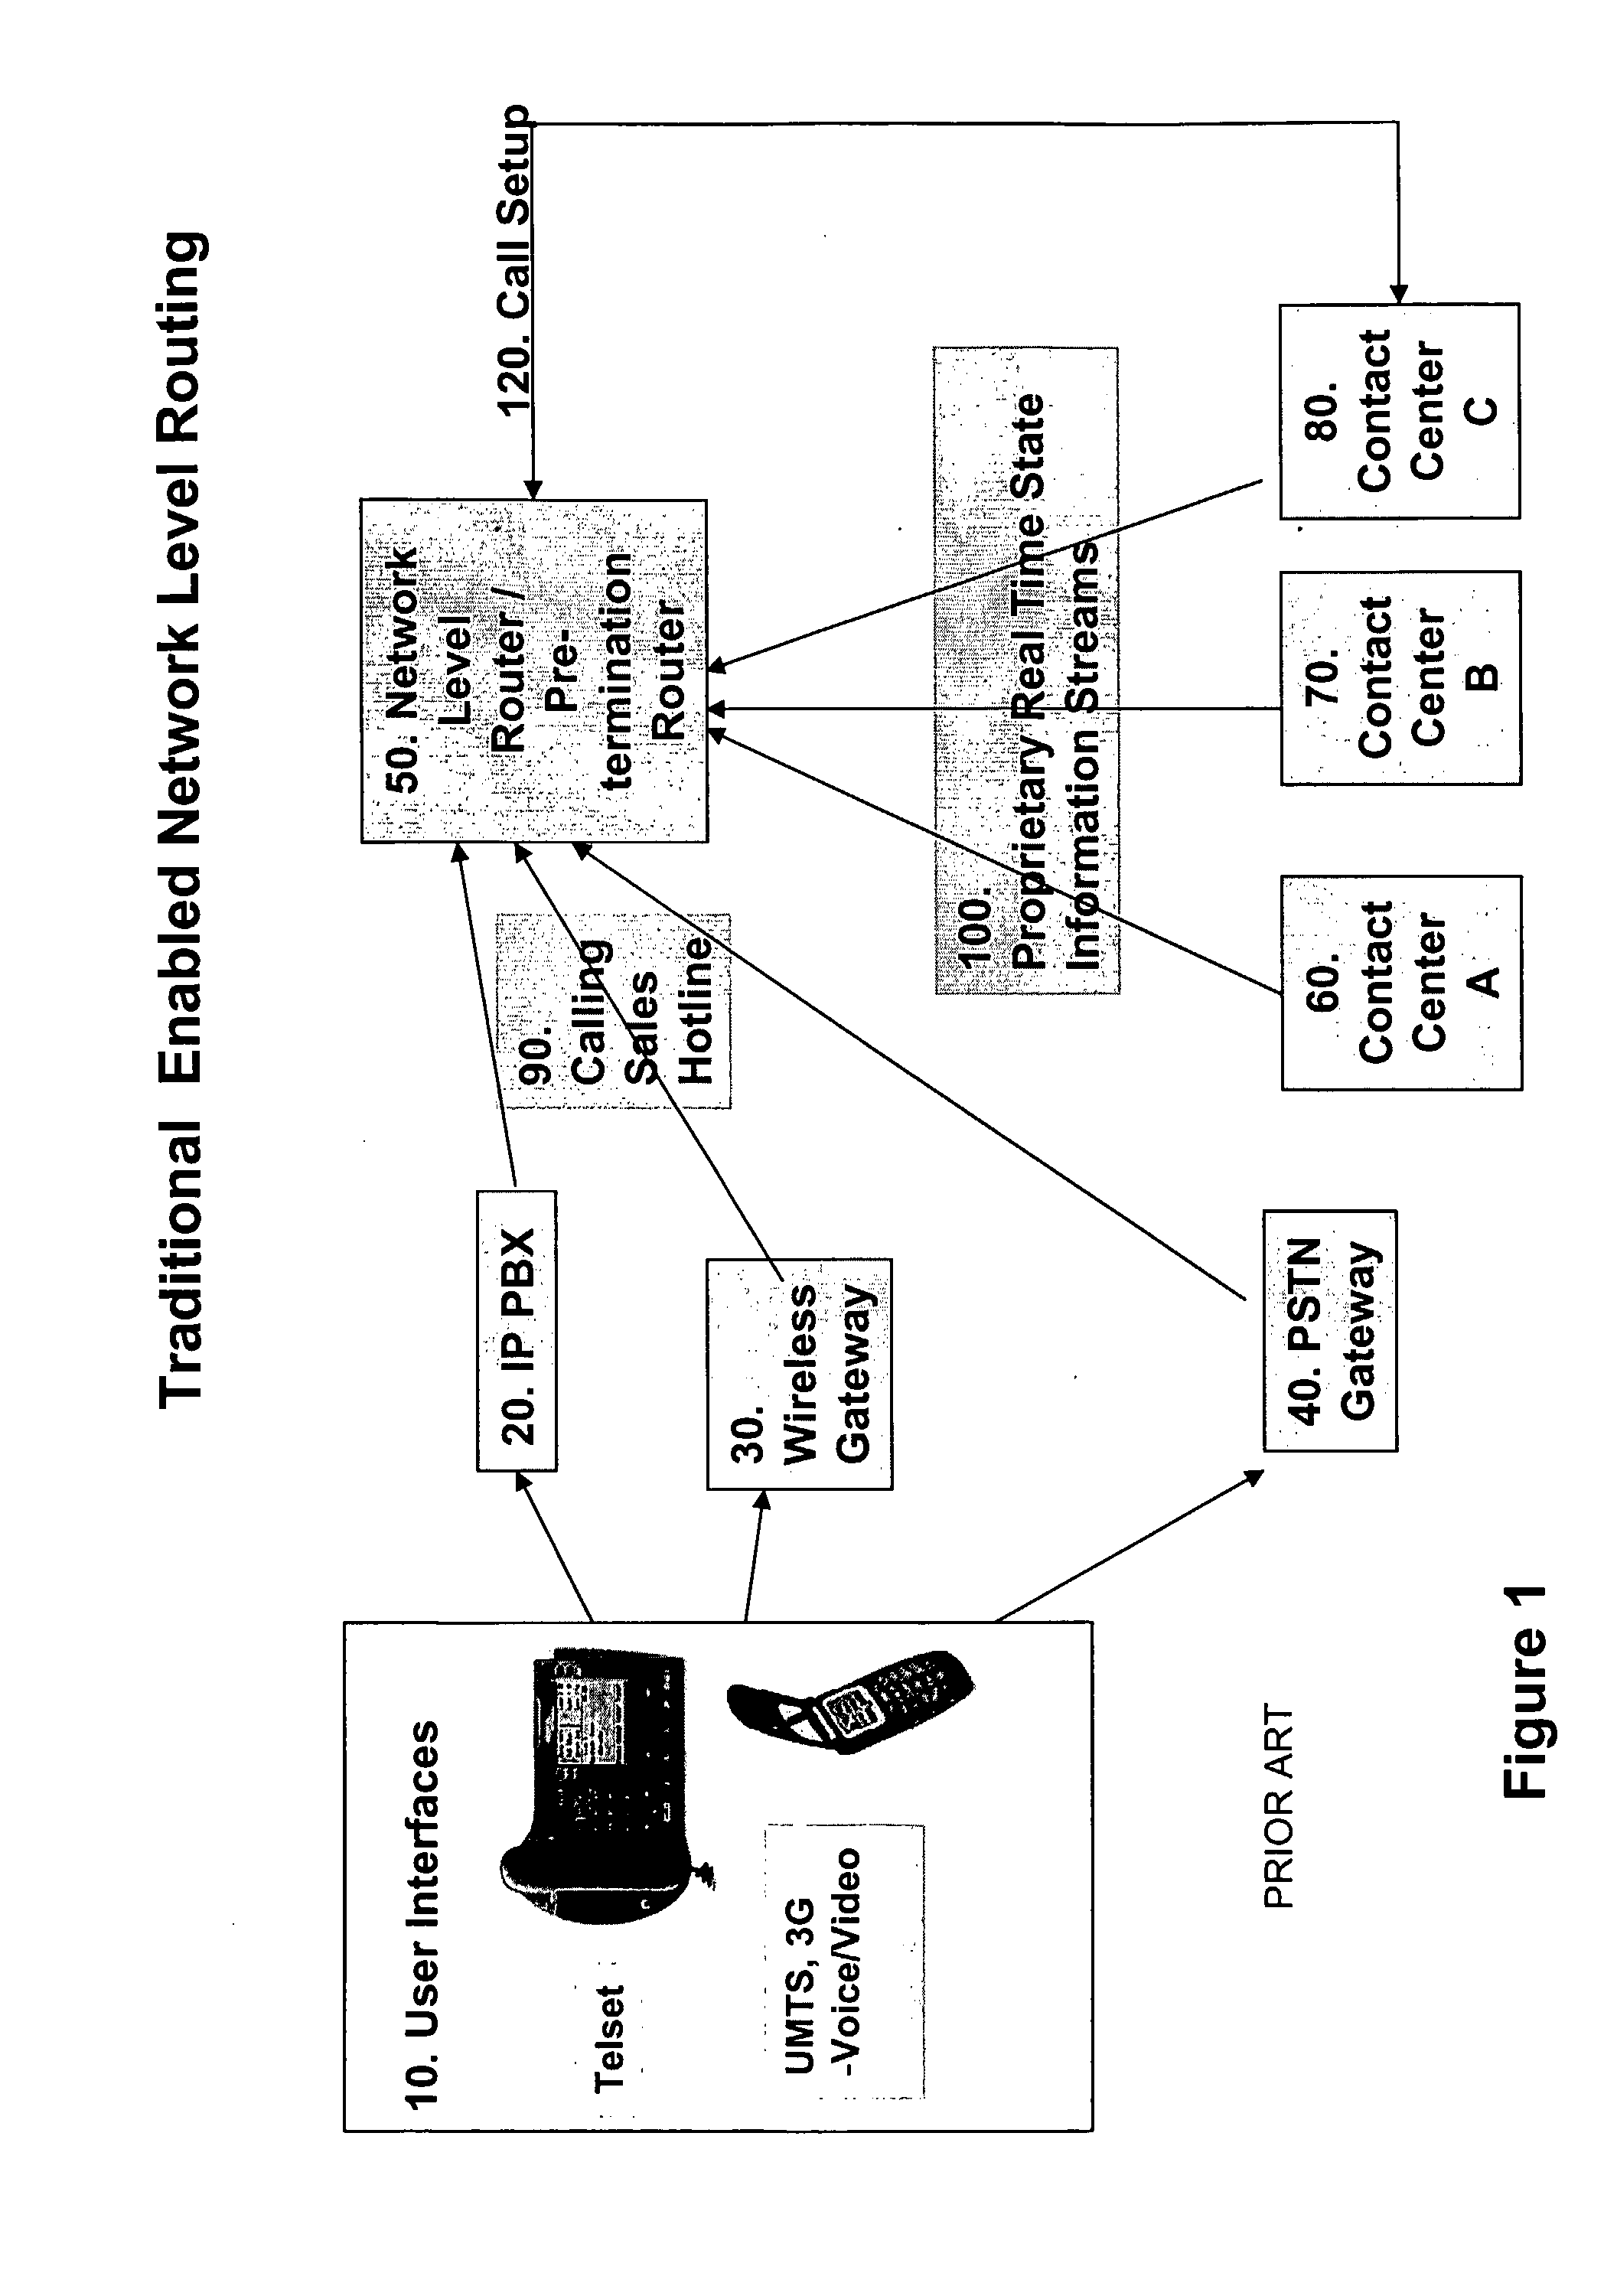 Method of Operating A Contact Center